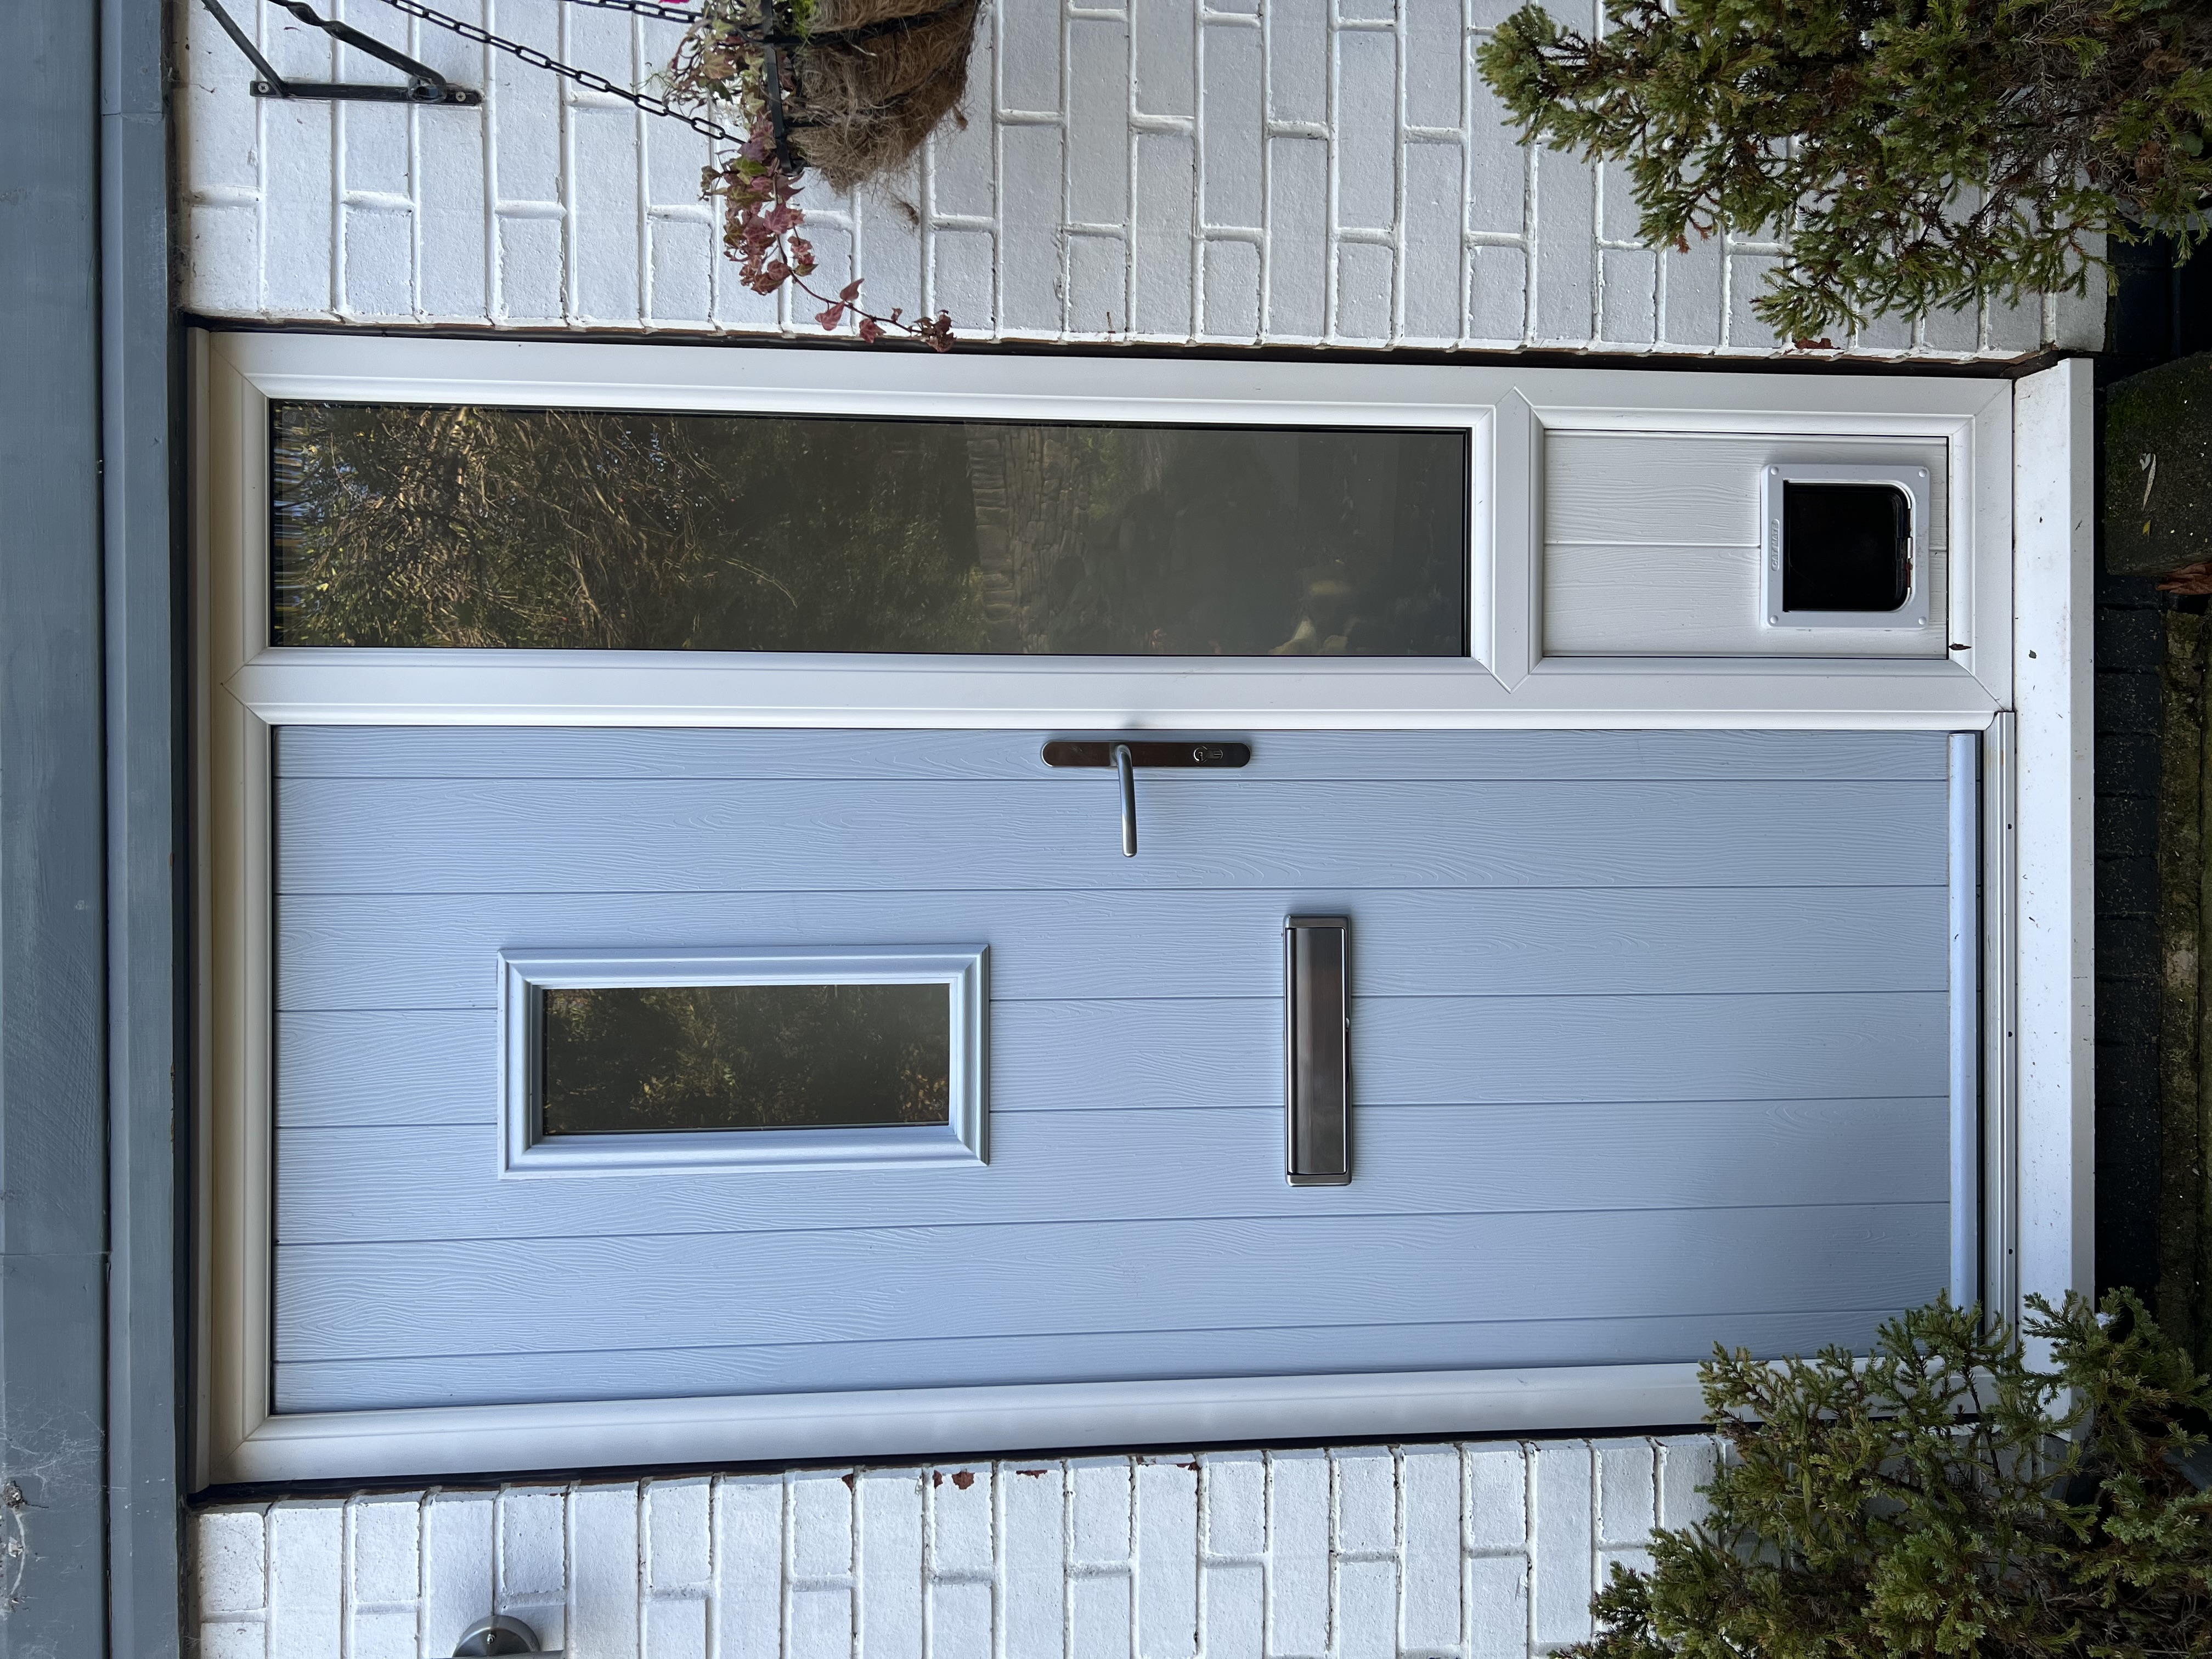 Flint 2 composite door in Duck Egg Blue with White frame and integrated cat flap